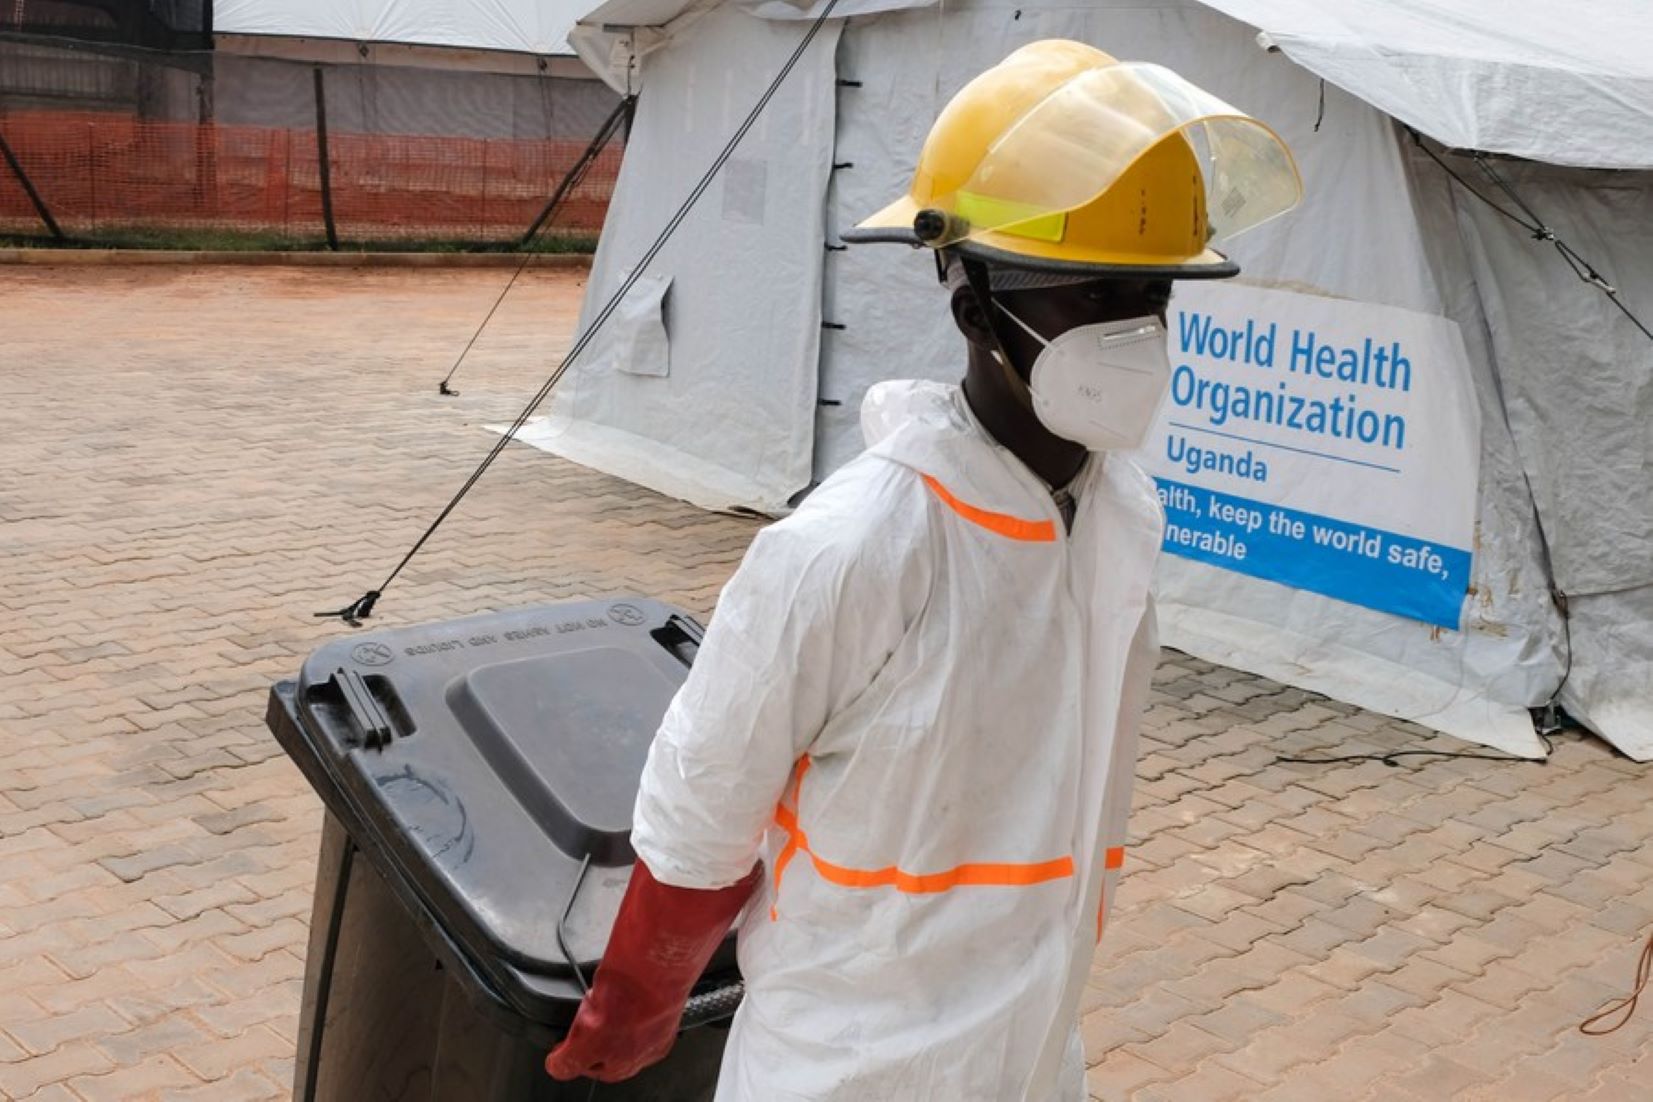 Uganda Rules Out Ebola Outbreak After Results From Suspected Case Turn Negative